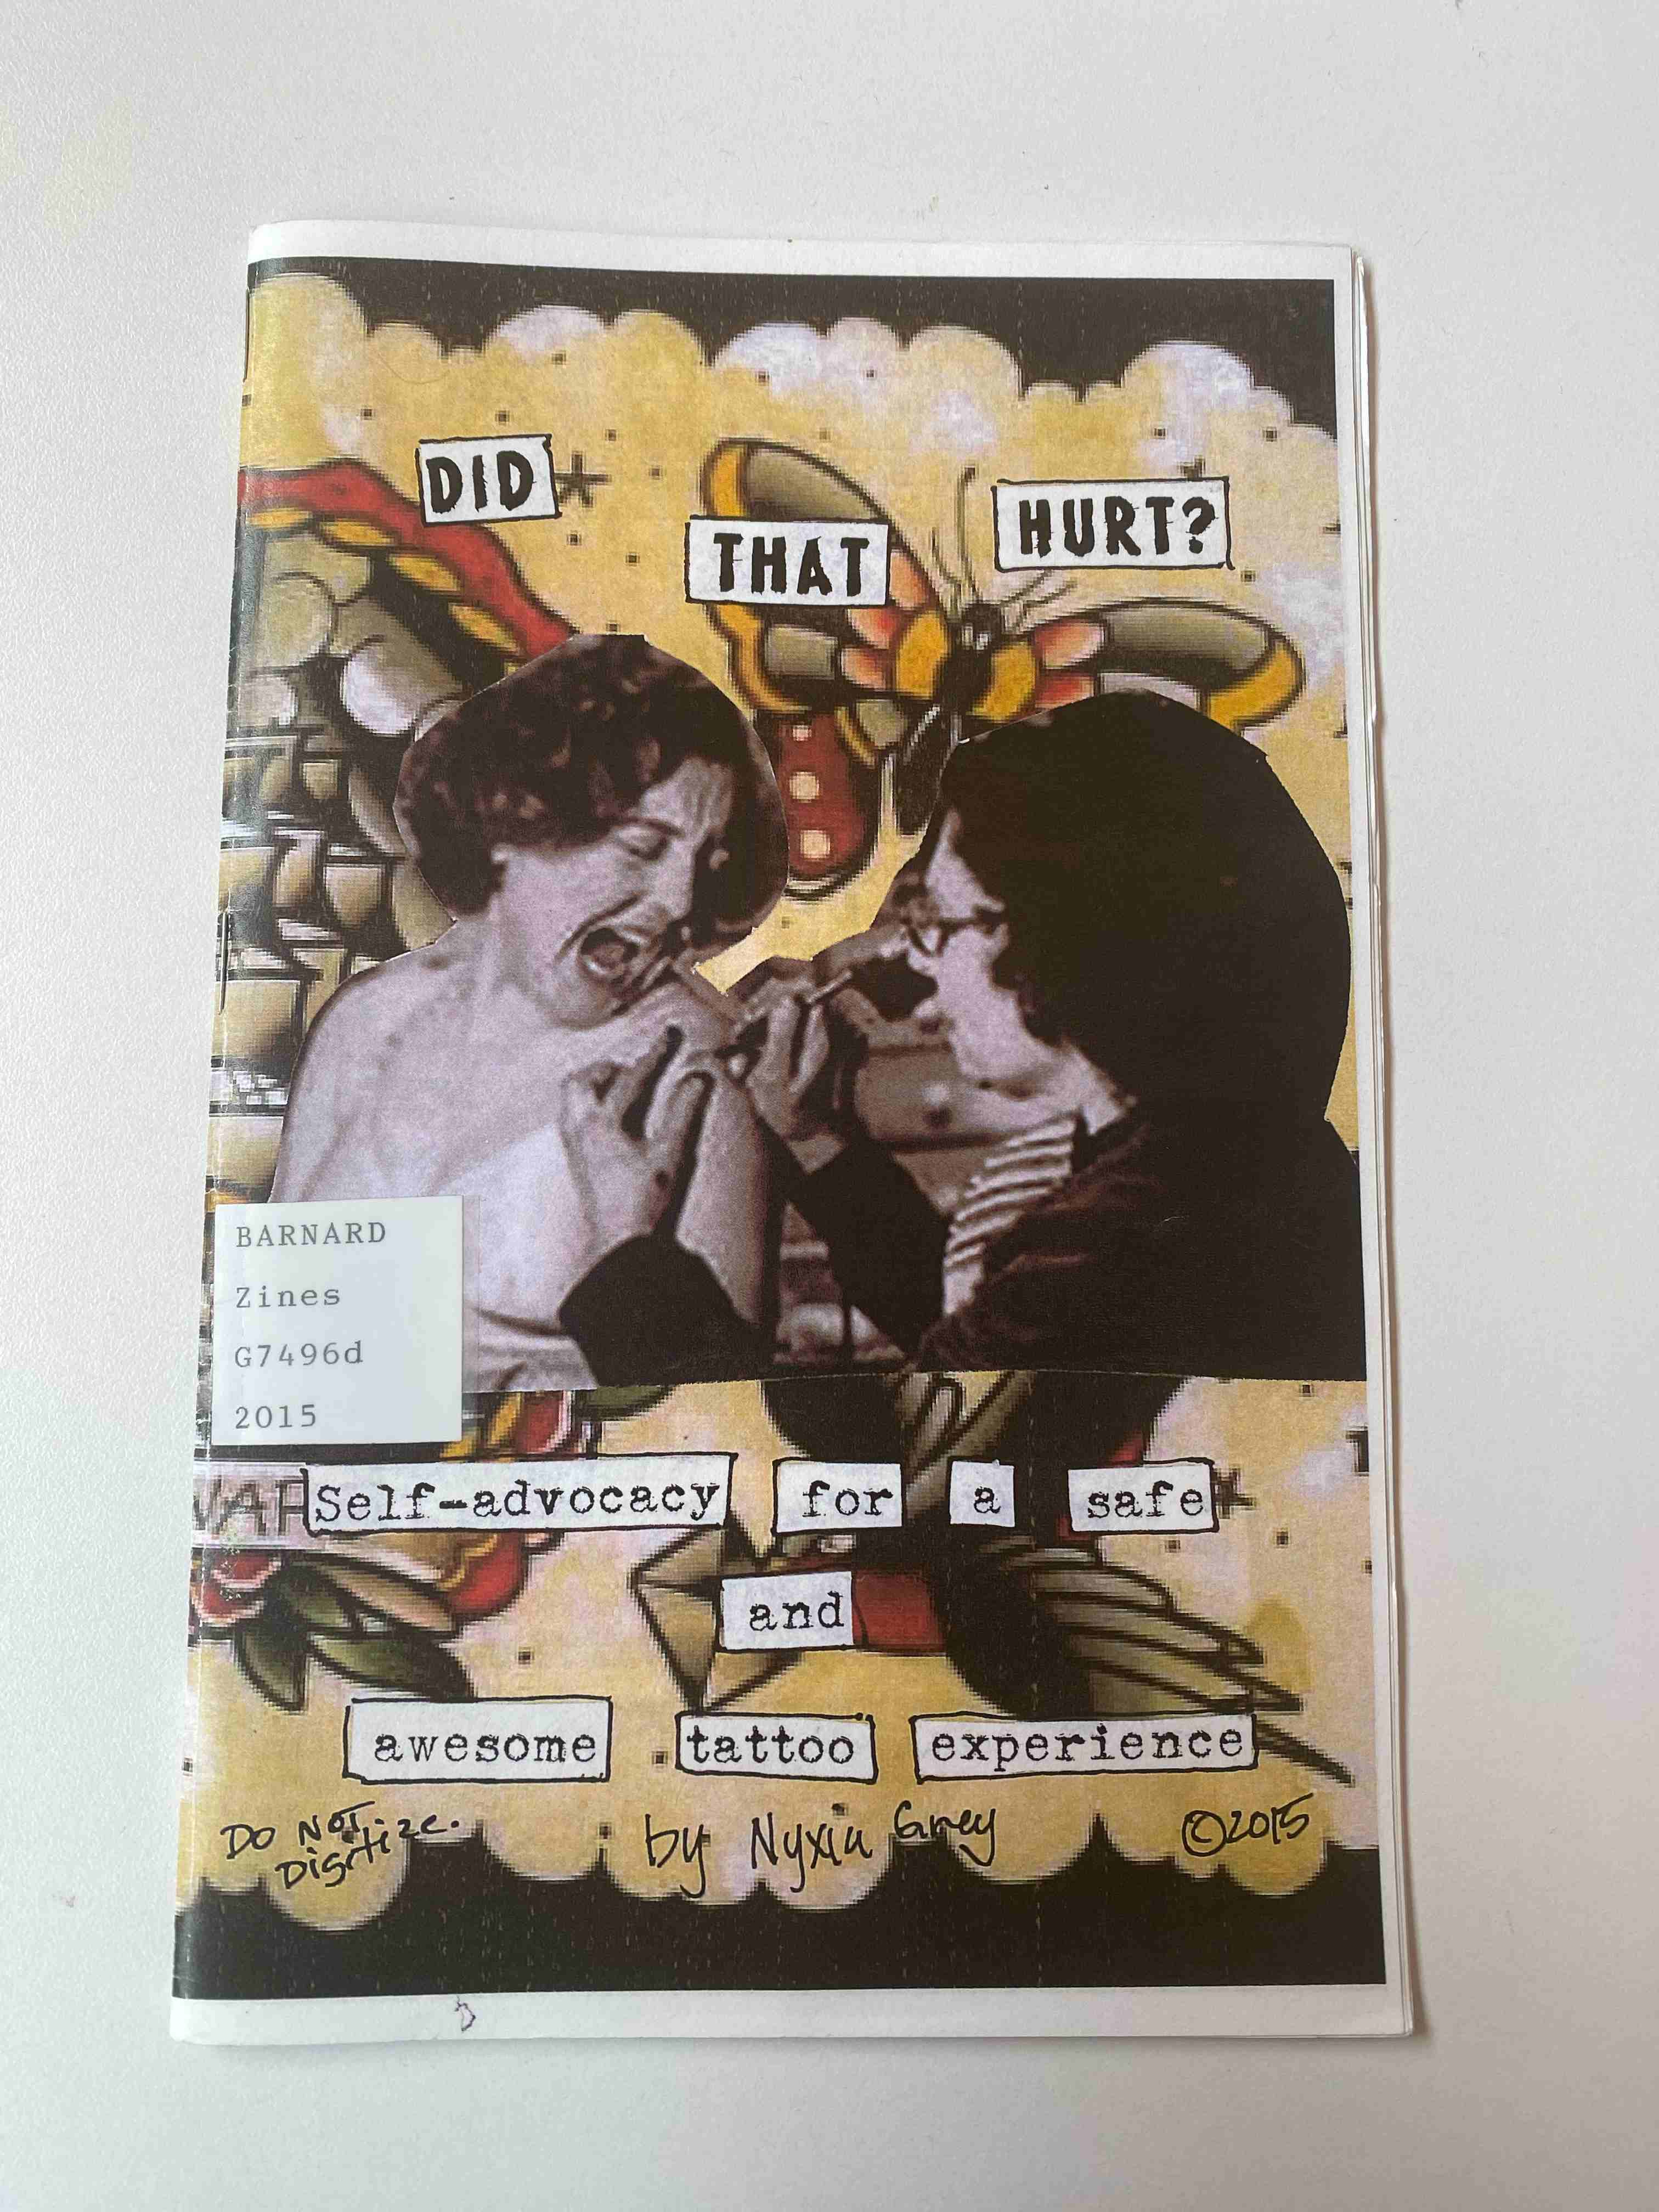 cover of 'Did that Hurt? : Self-Advocacy for a Safe and Awesome Tattoo Experience'